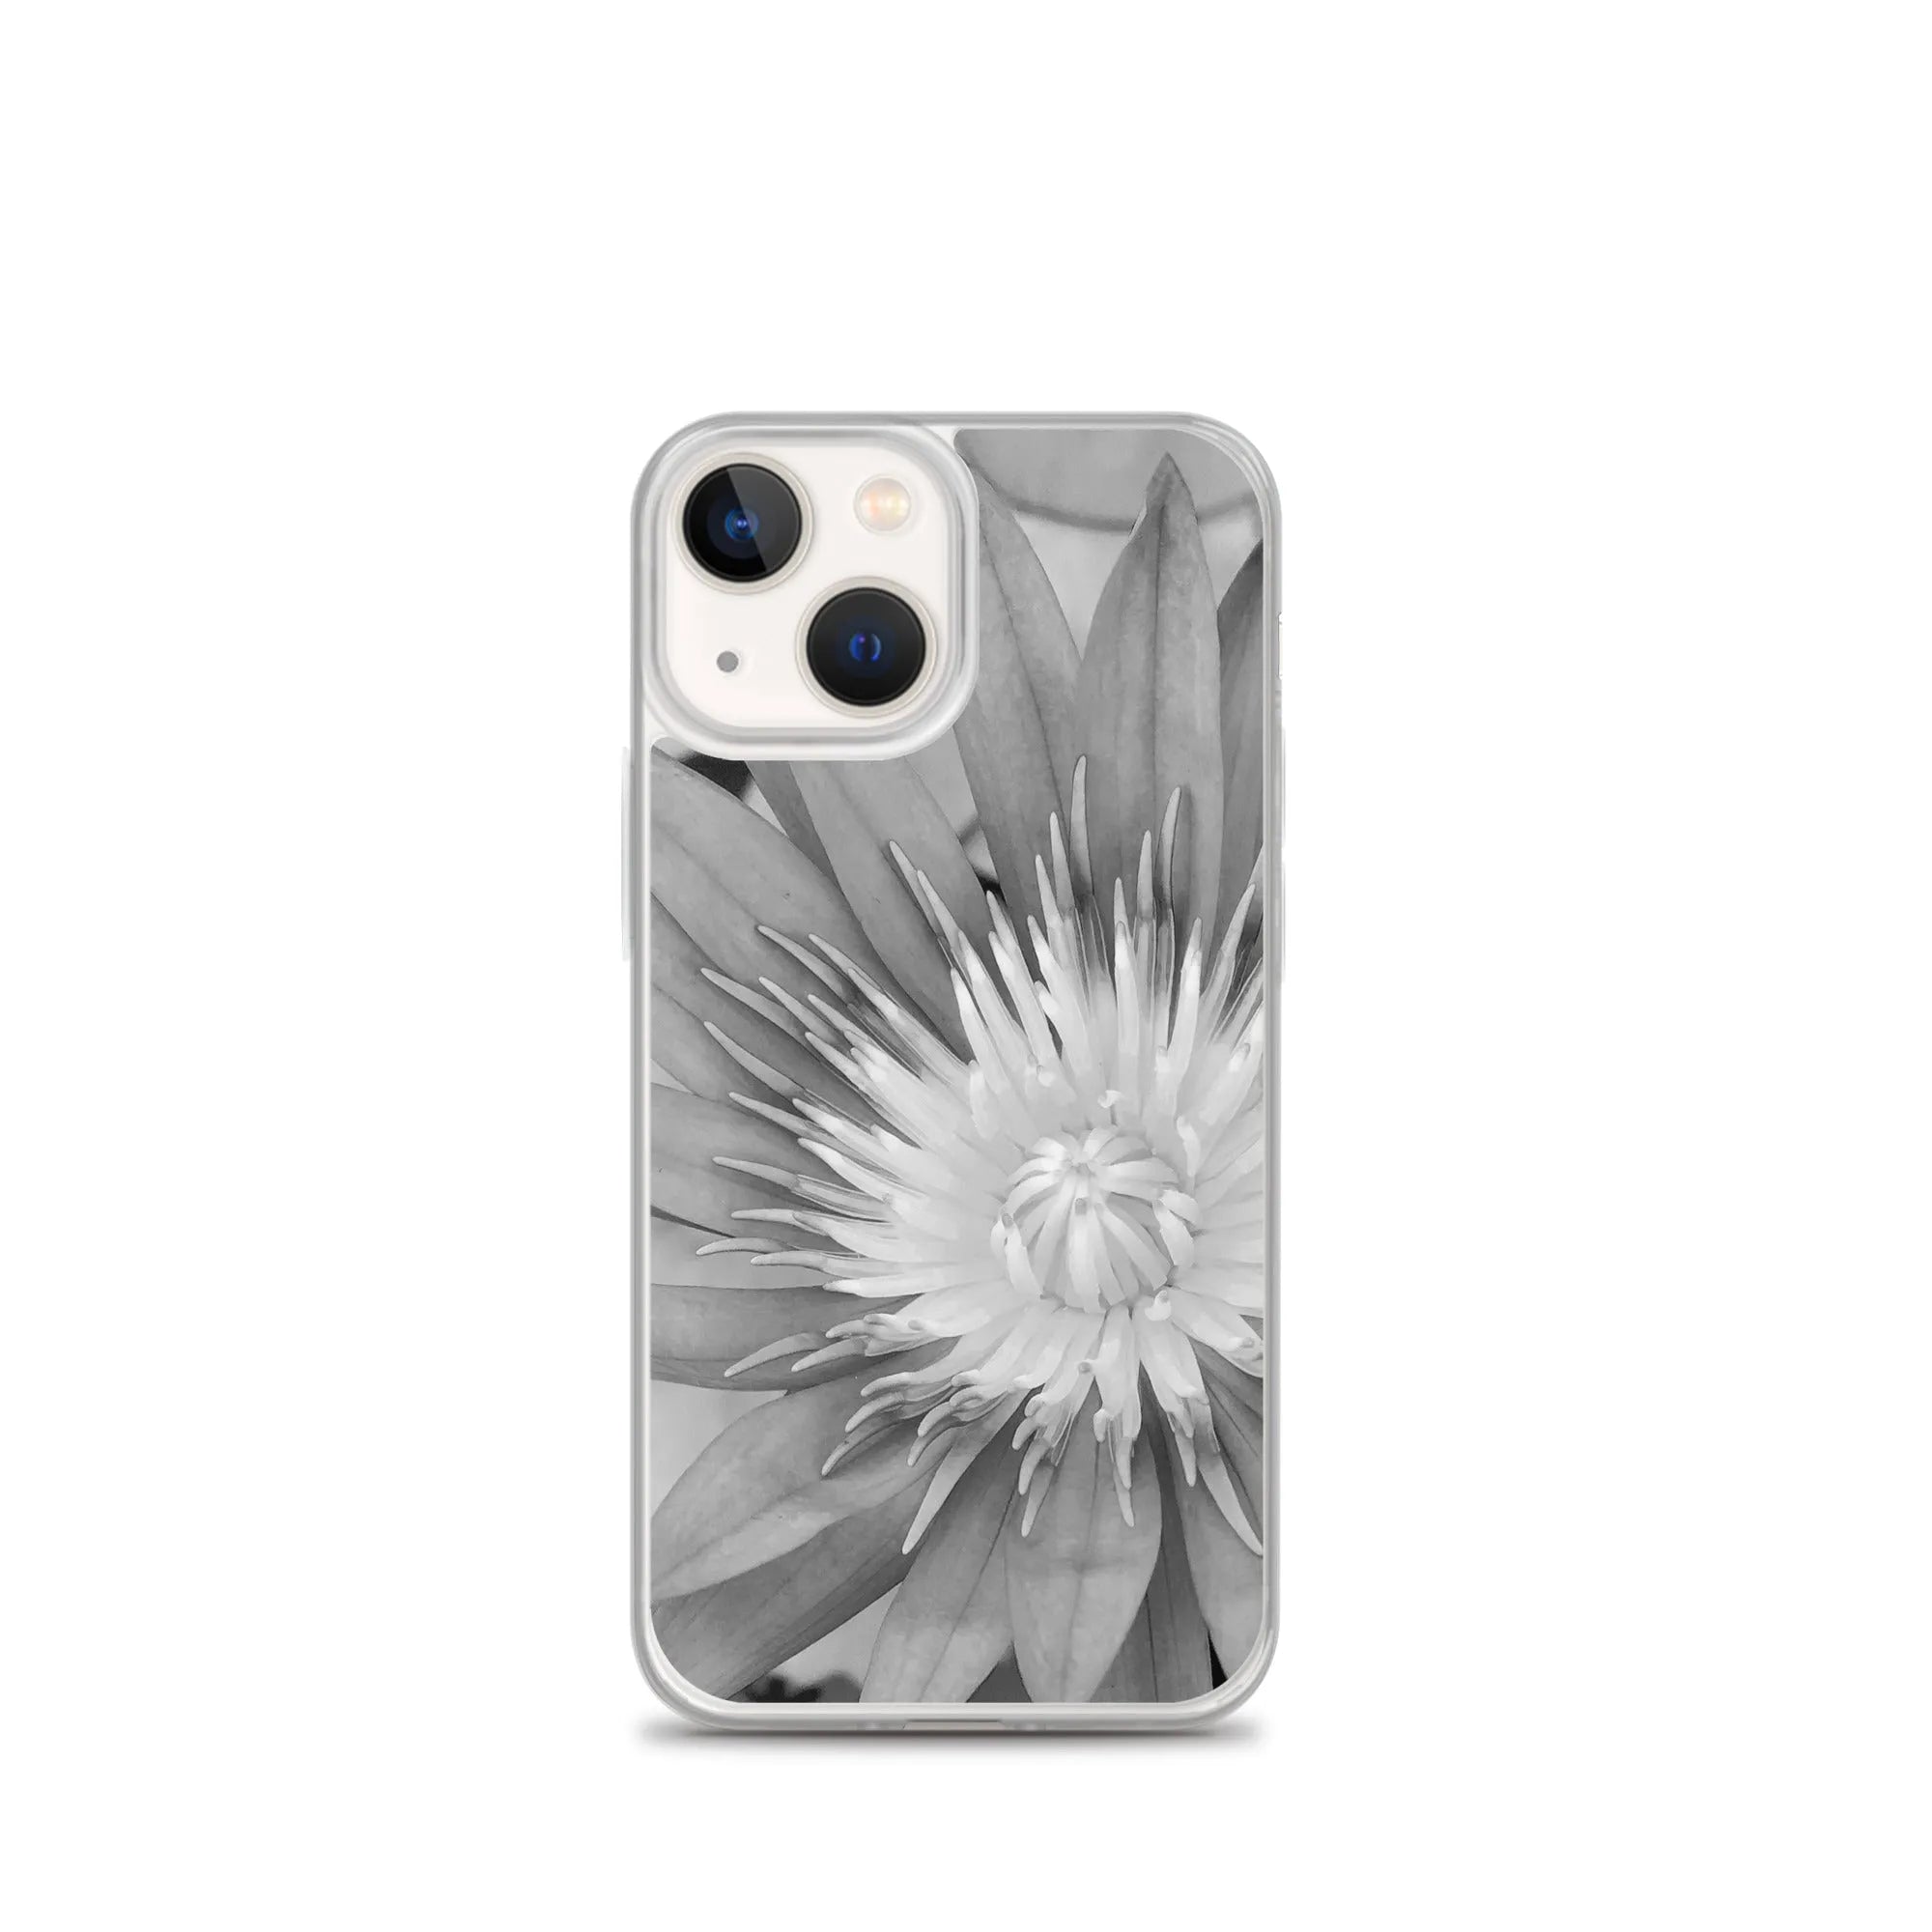 Lilliput Floral Iphone Case - Black And White - Iphone 13 Mini - Mobile Phone Cases - Aesthetic Art